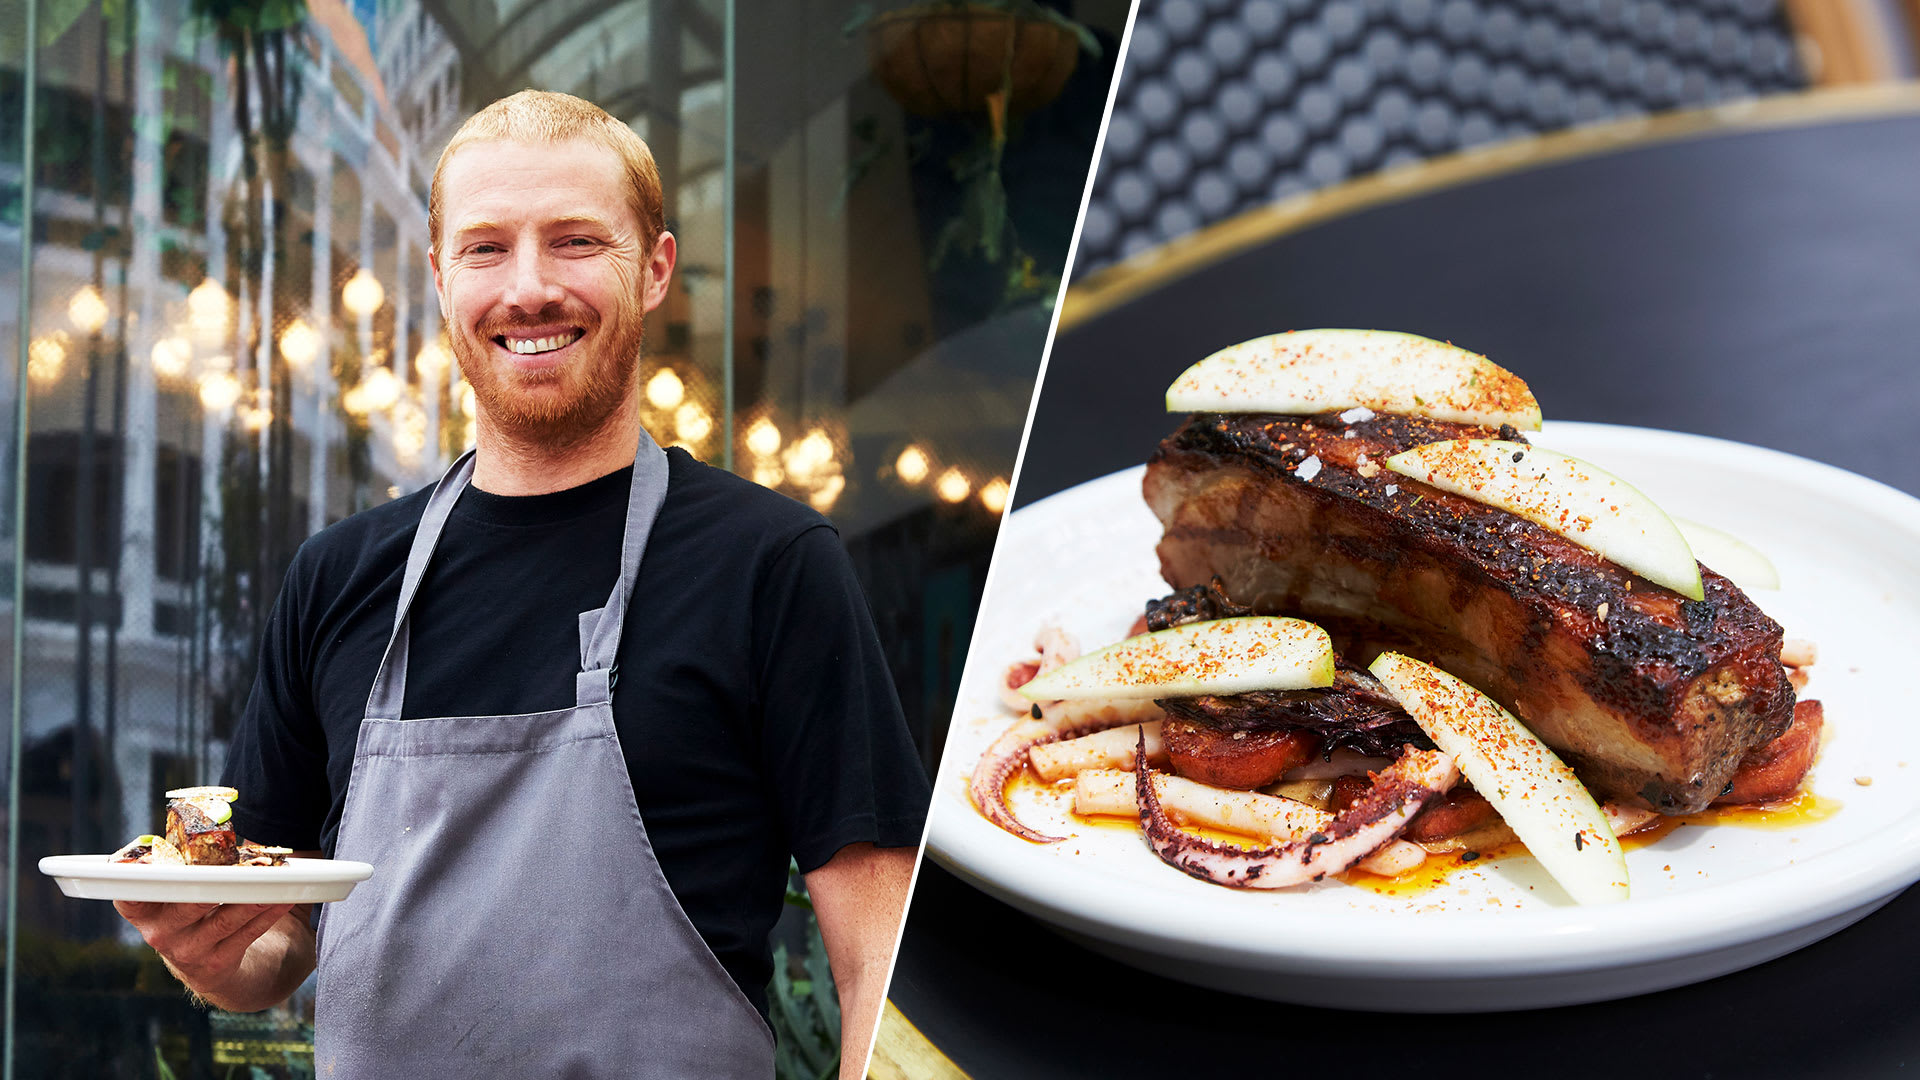 This Vegan Chef Makes Awesome Grilled Pork Belly